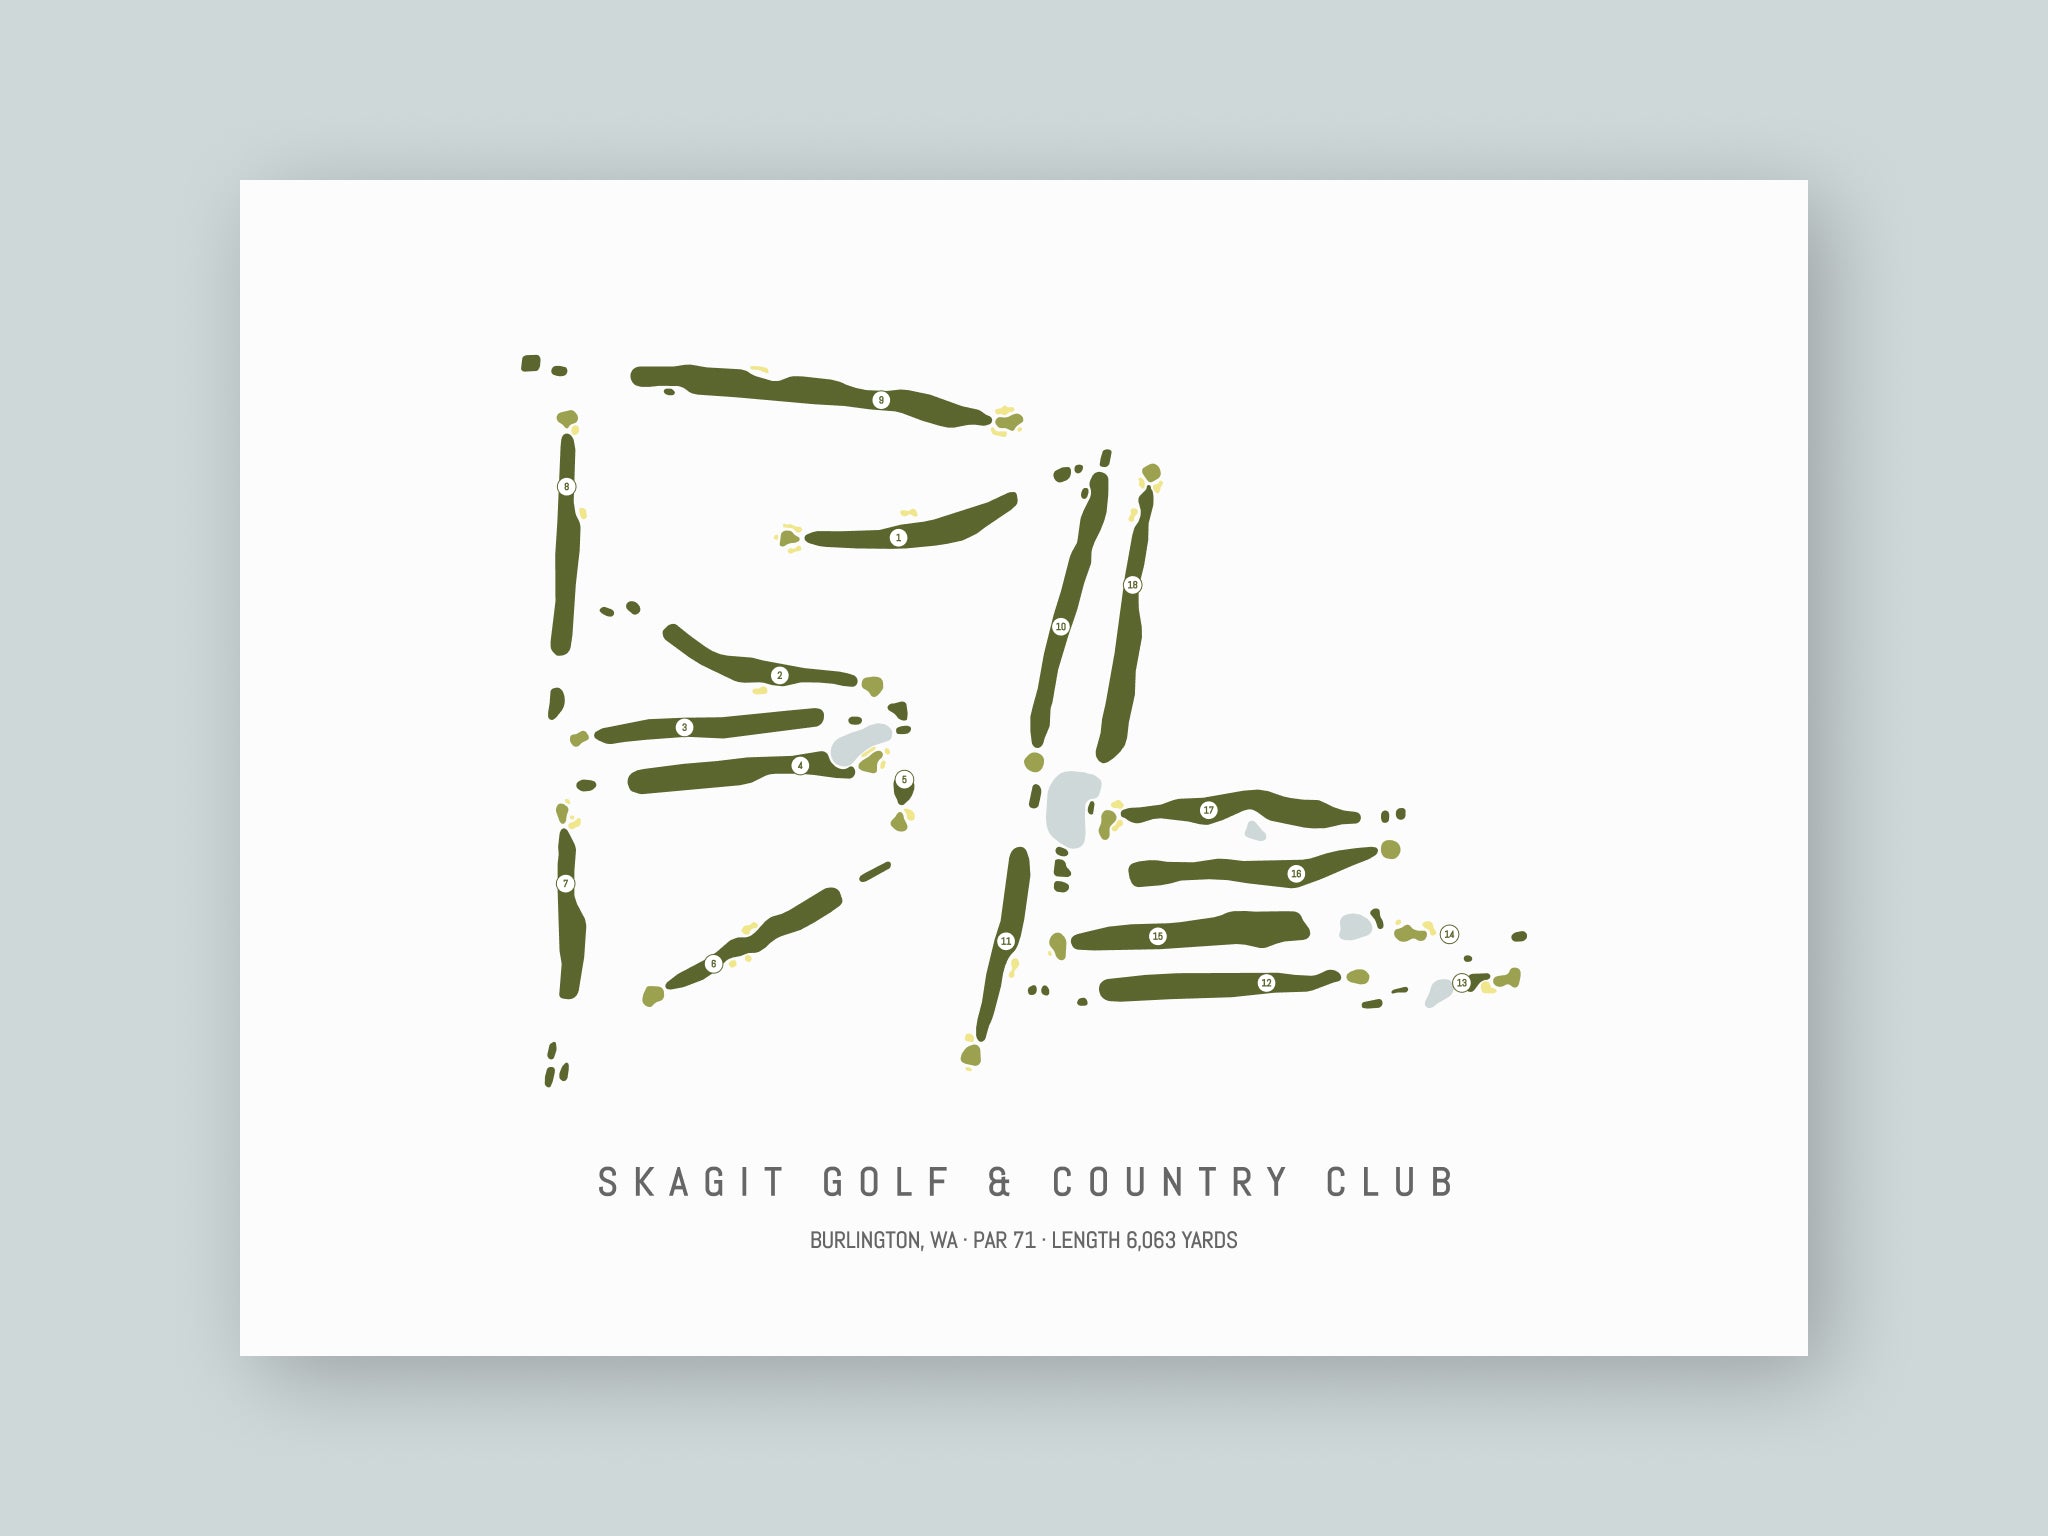 Skagit-Golf-And-Country-Club-WA--Unframed-24x18-With-Hole-Numbers